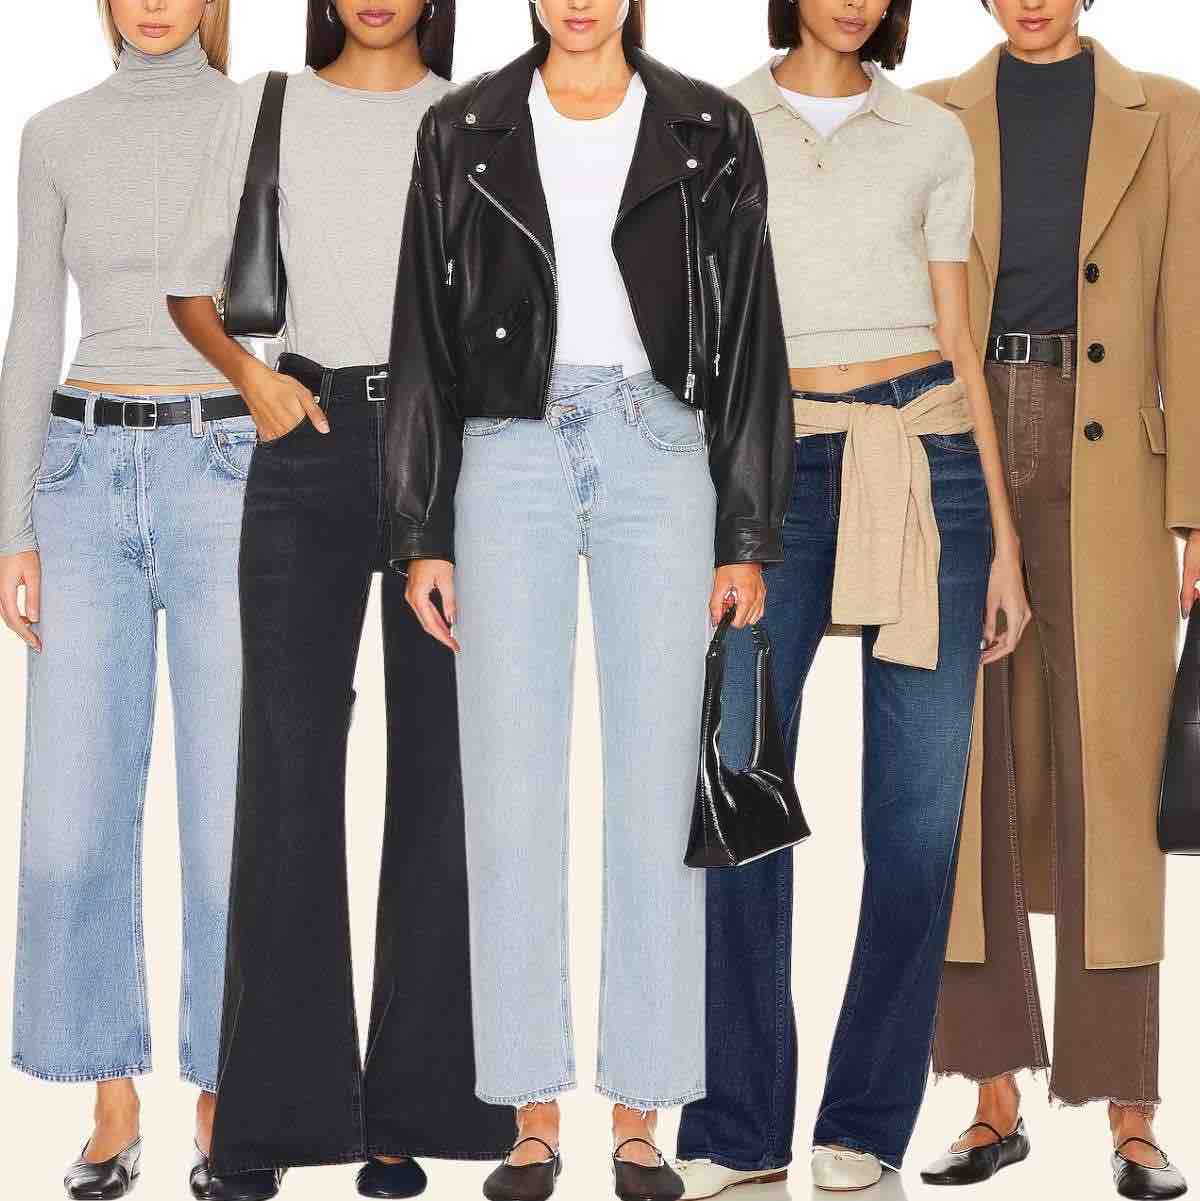 Collage of 4 women wearing different wide leg jeans with ballerina flats.